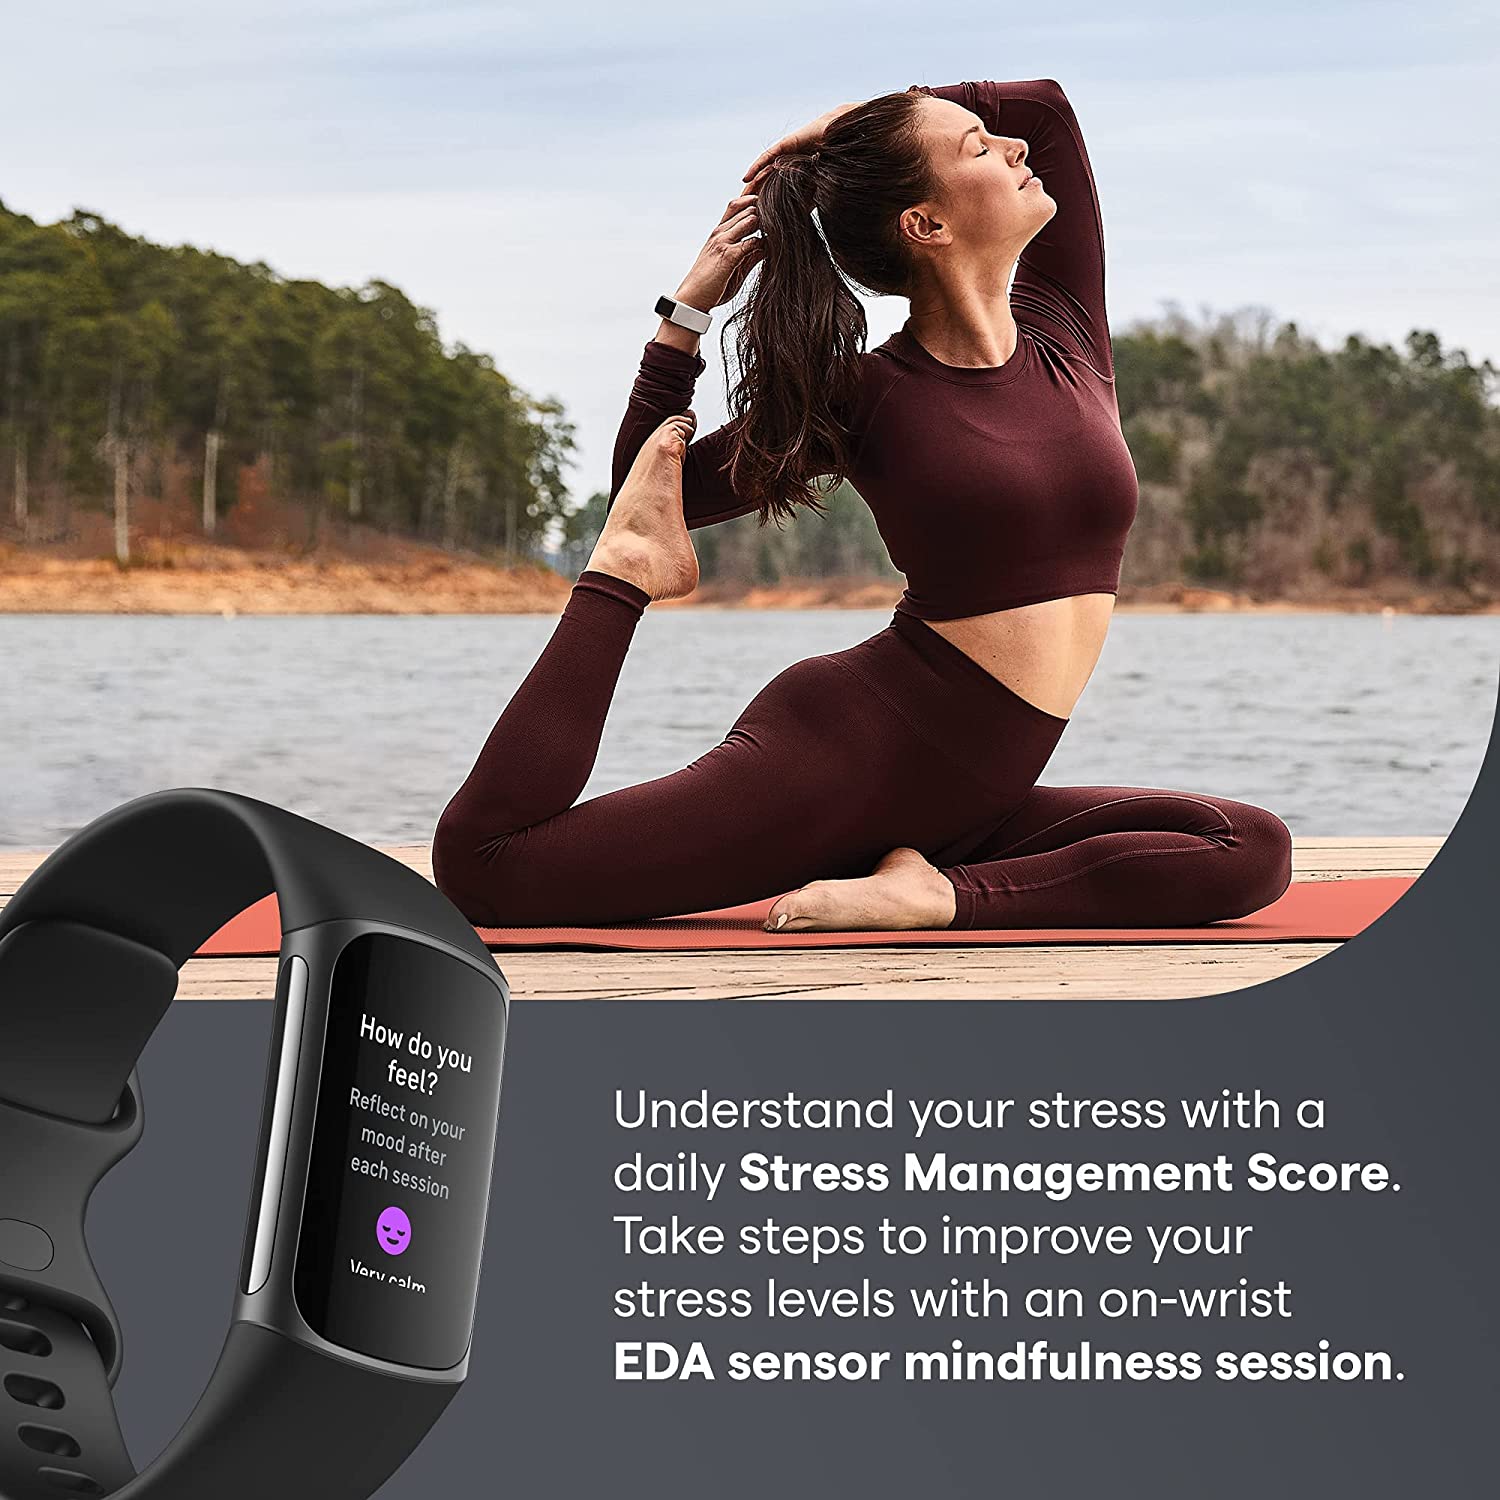 5 Advanced Fitness & Health Tracker Built-in S